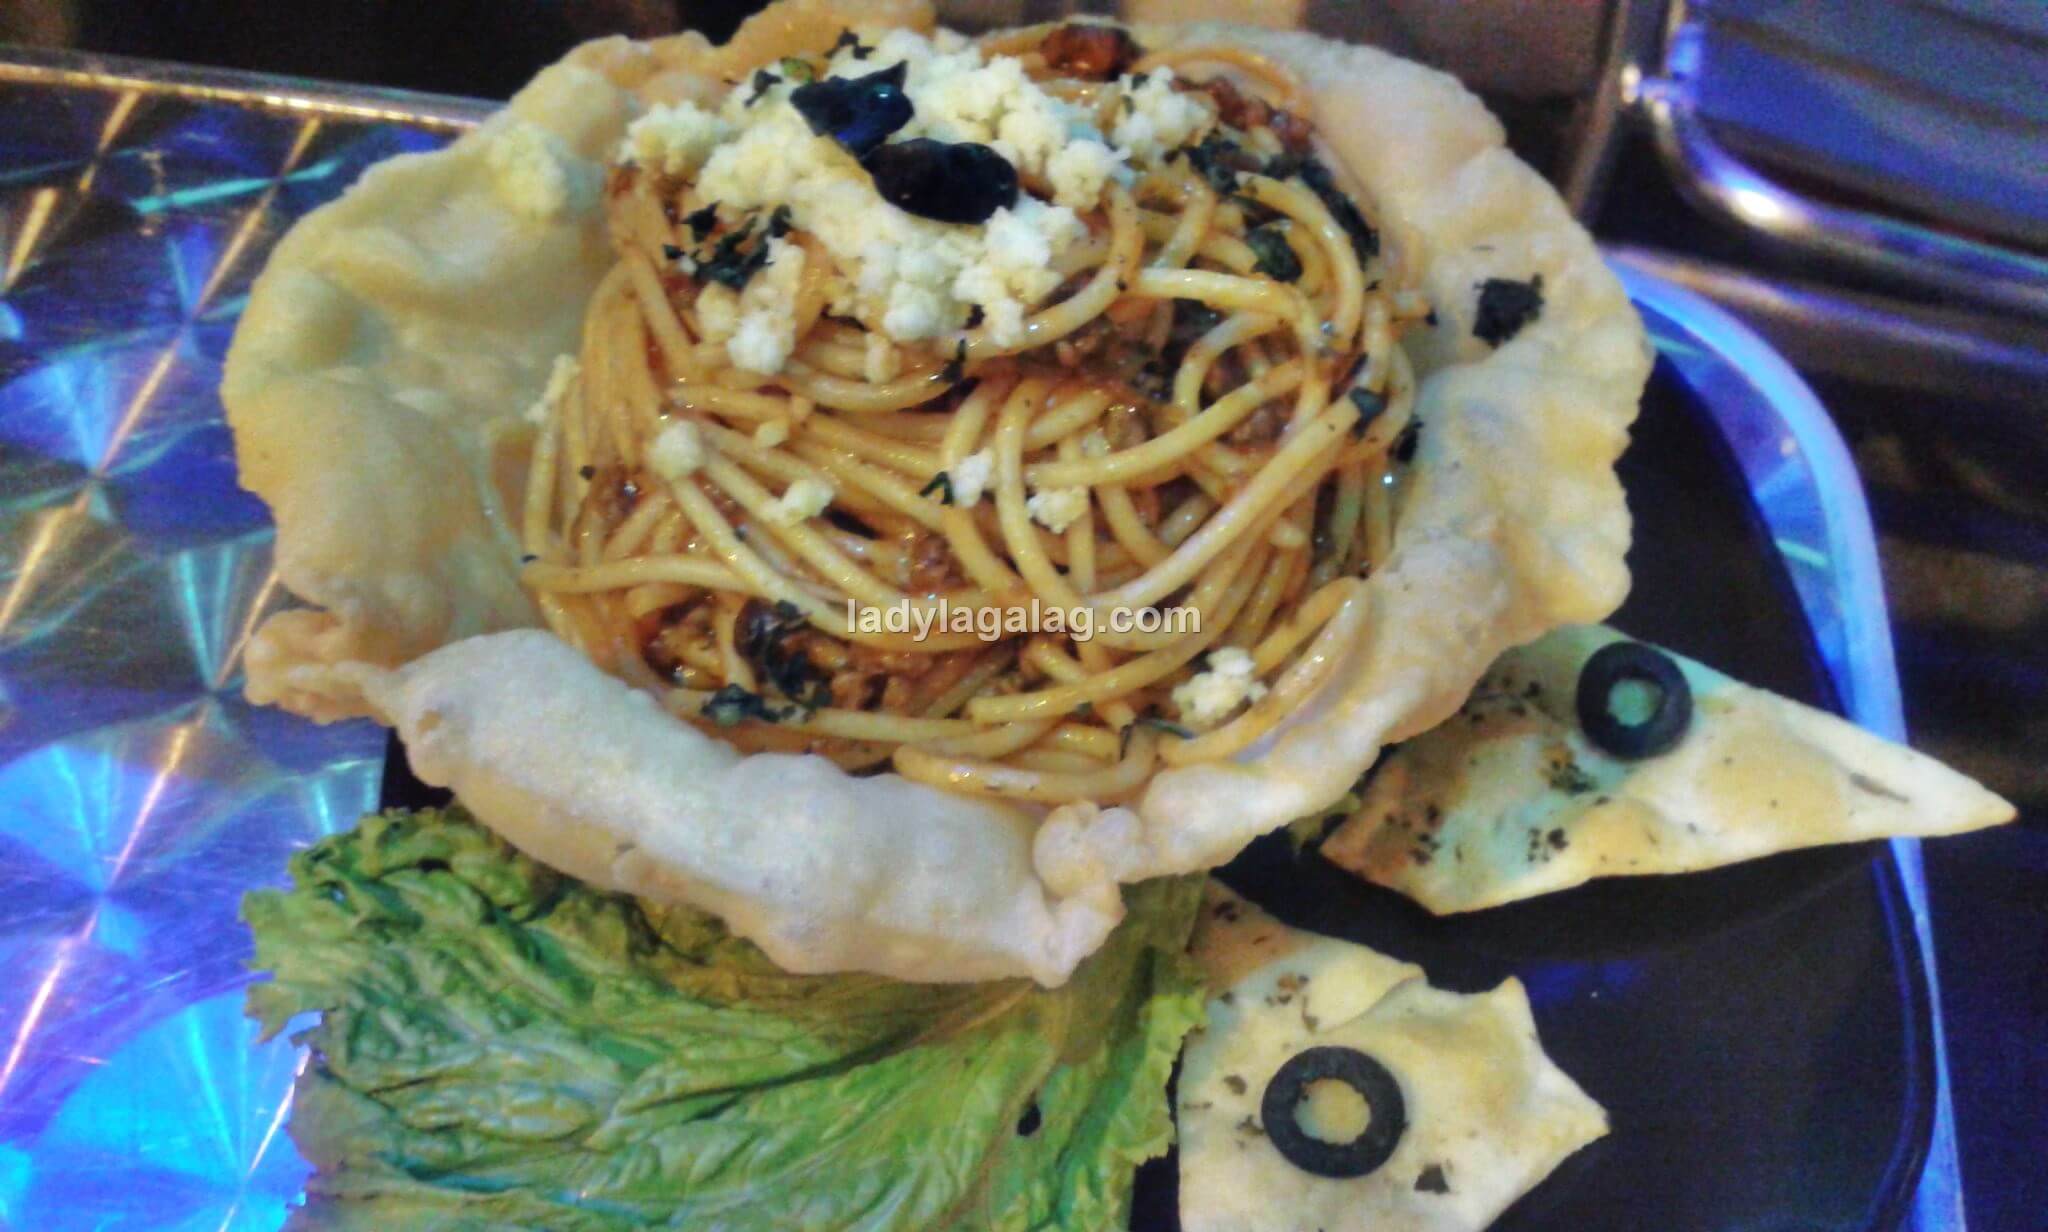 A pizza shop in Mandaluyong that has a fascinating presentation of their spaghetti dish